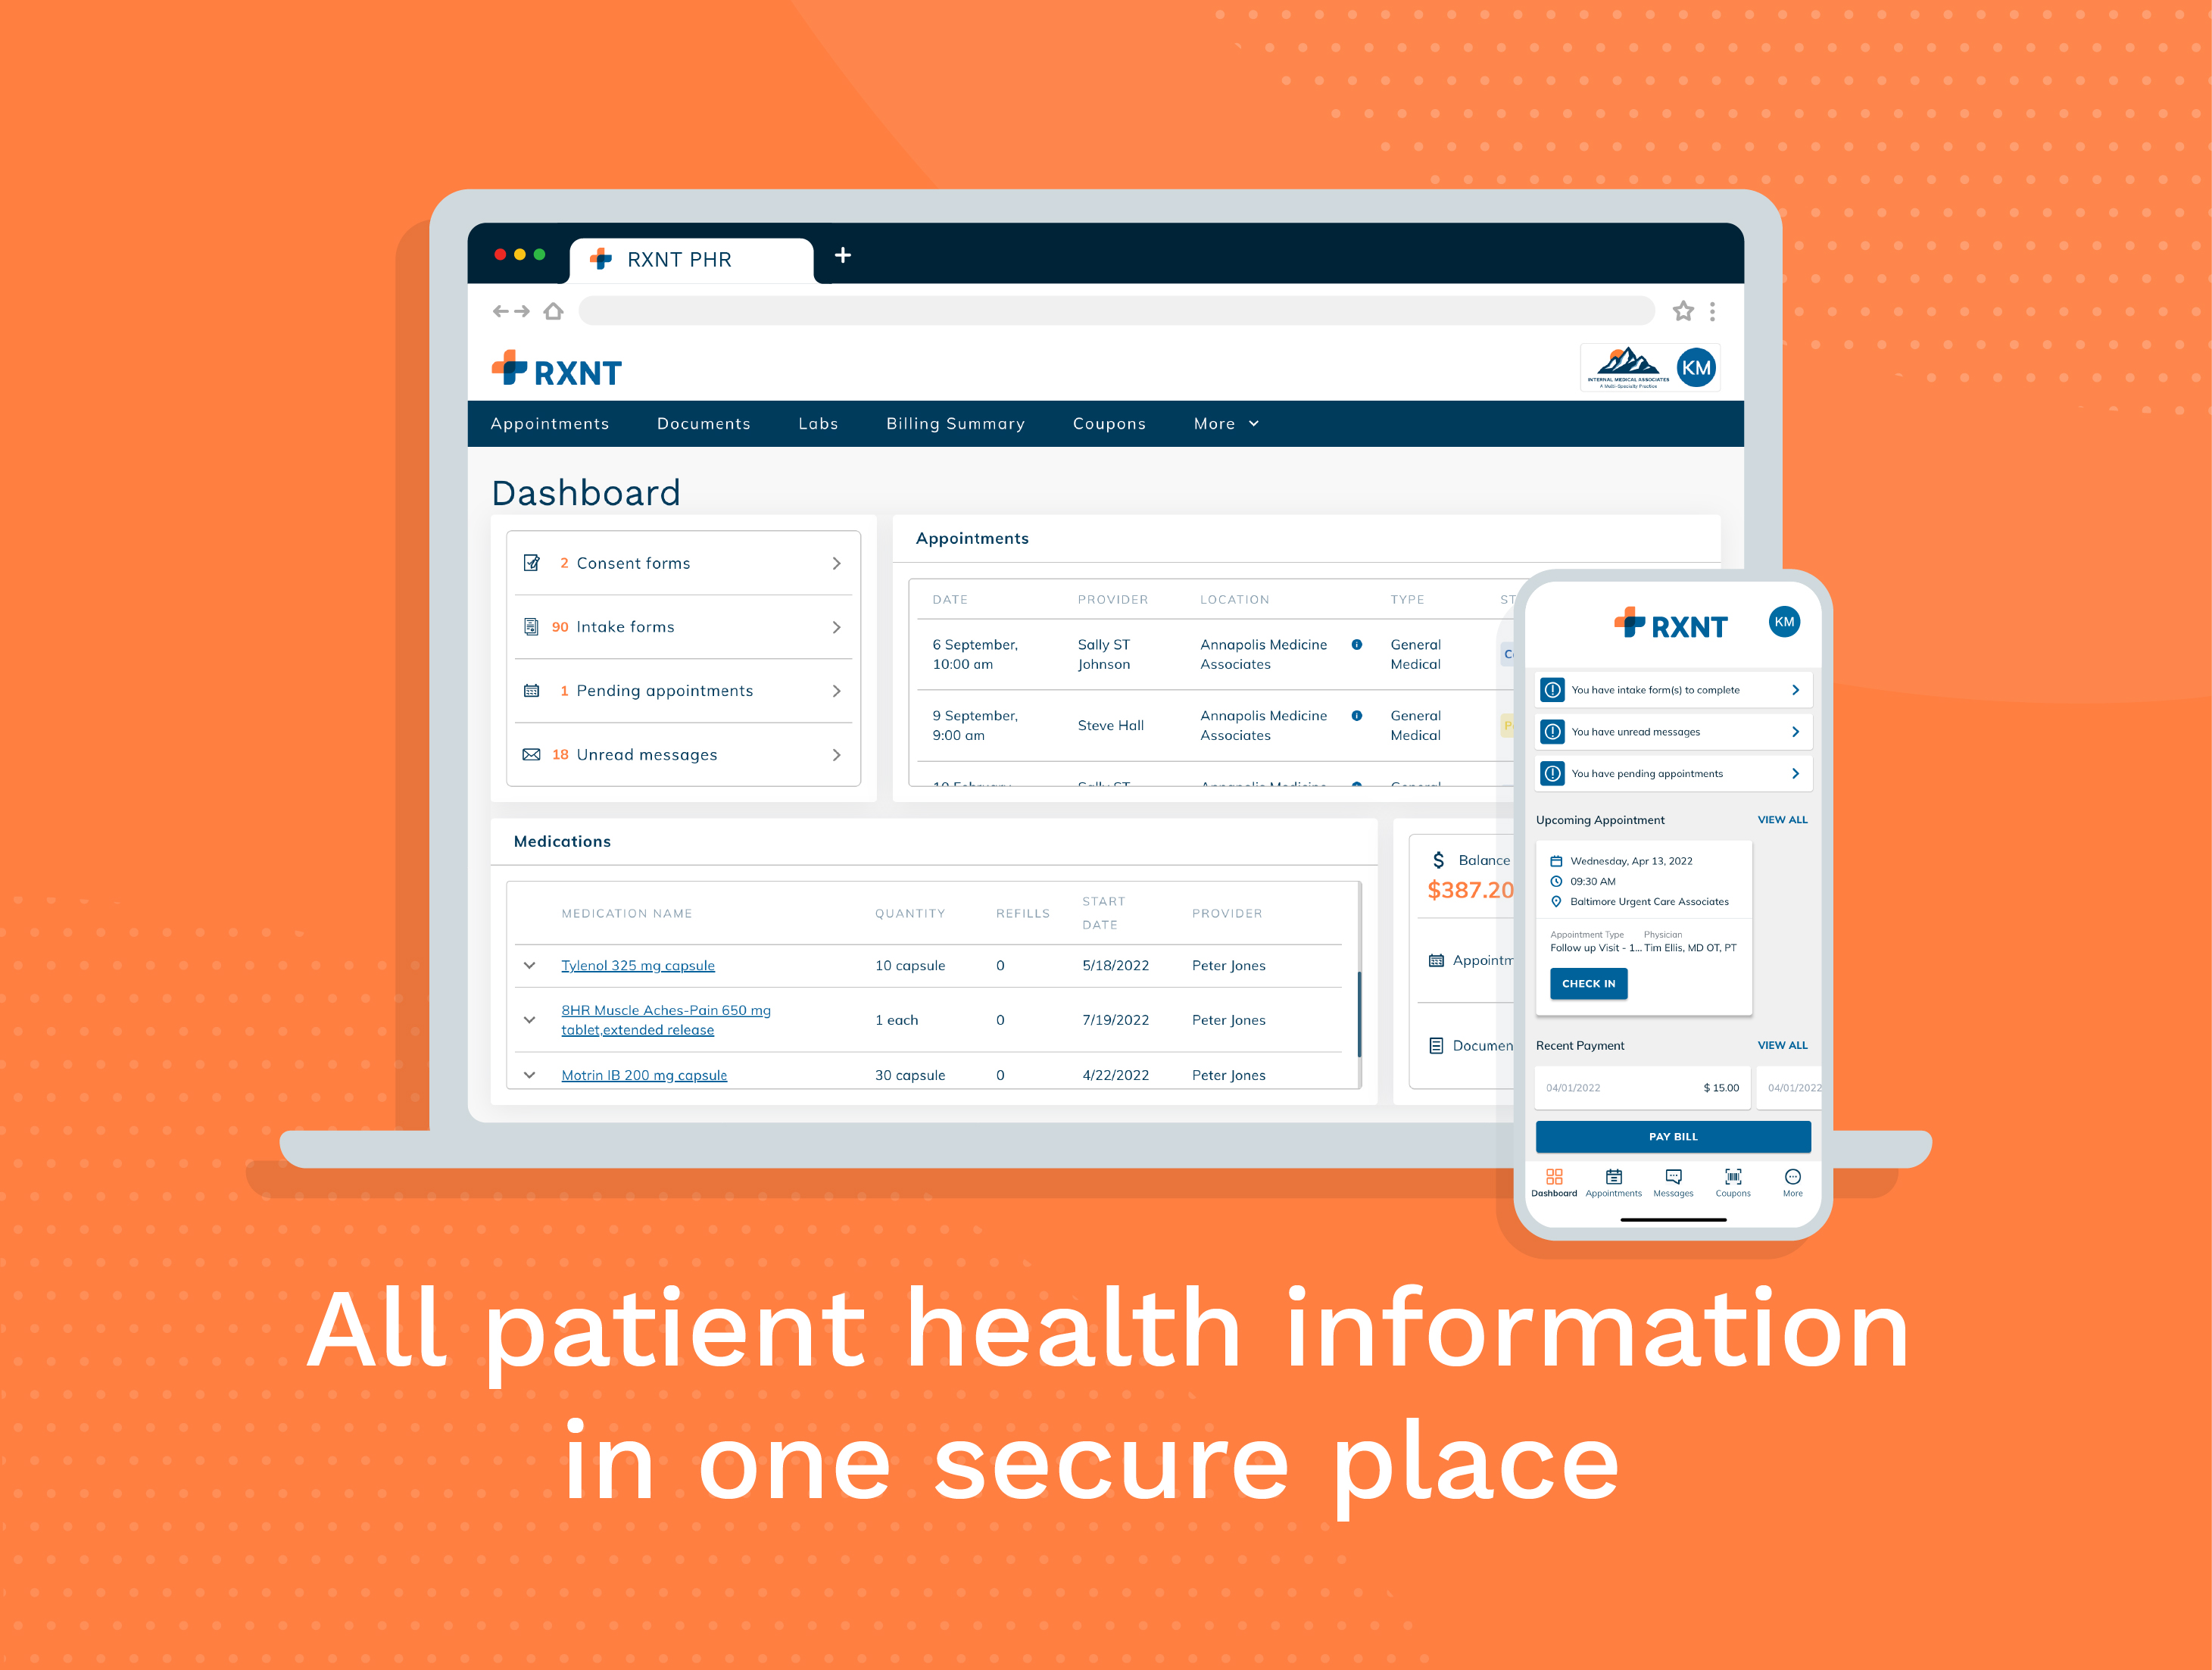 RXNT Patient Engagement Software. Enable patients to schedule appointments, send messages, review lab results, sign documents & forms, and pay bills online. All patient health information in one secure place. Available for desktop, tablet, and mobile.